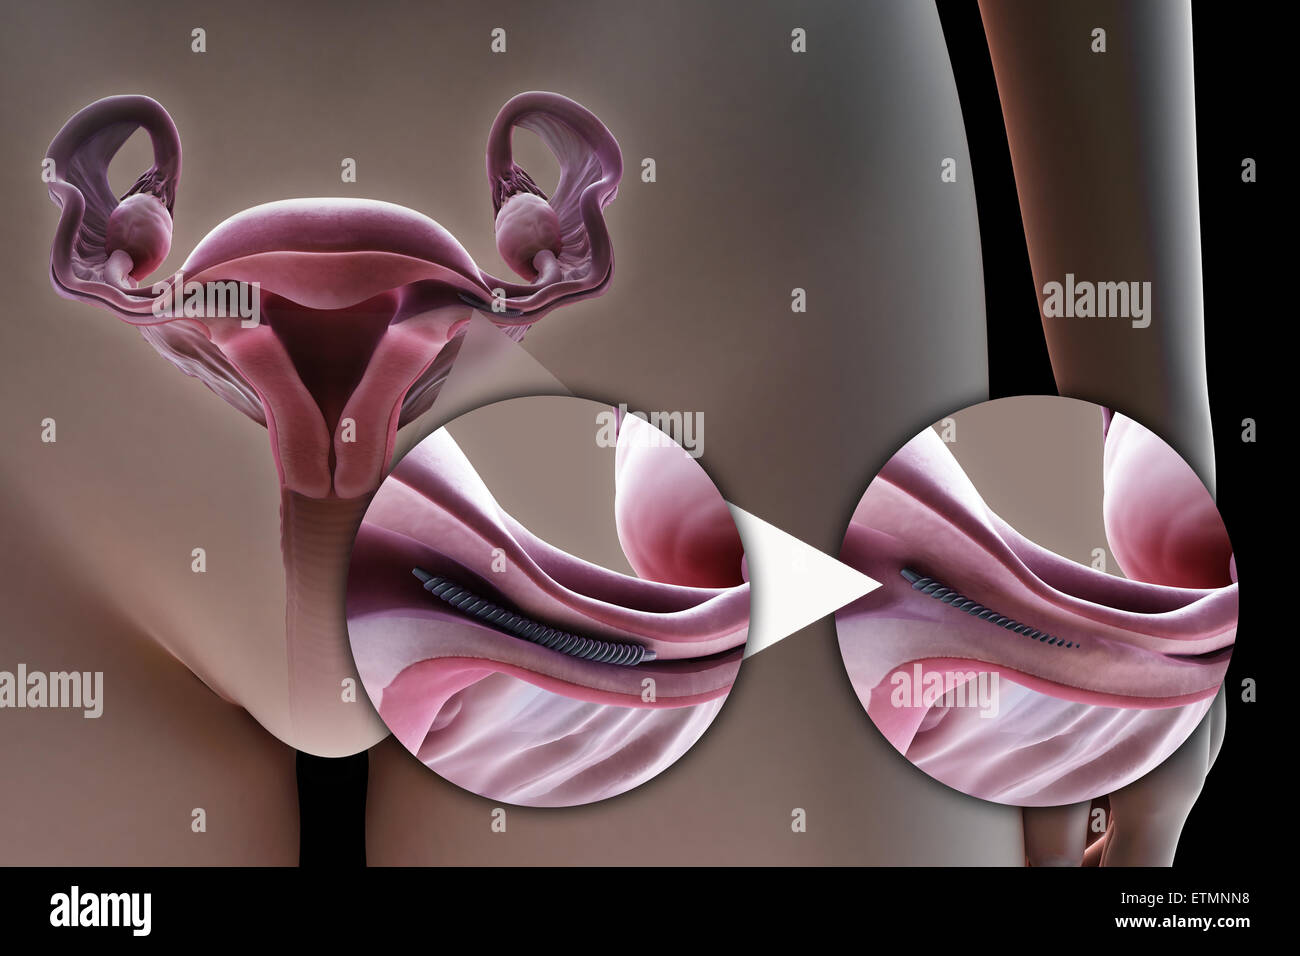 Illustration showing tubal ligation of the Fallopian tube by method of a metal implant, used to block the tube by the growth of scar tissue and prevent fertilization. Stock Photo